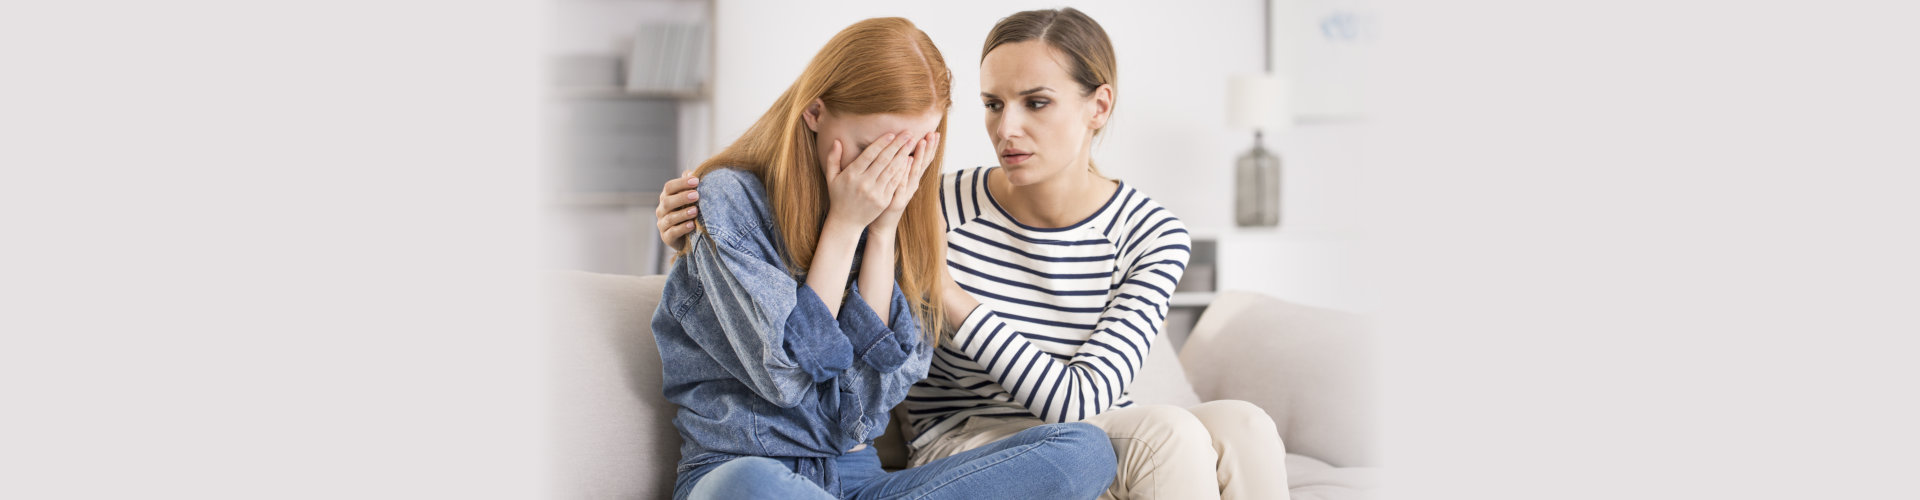 Young depressed women crying being comforted by friend at home